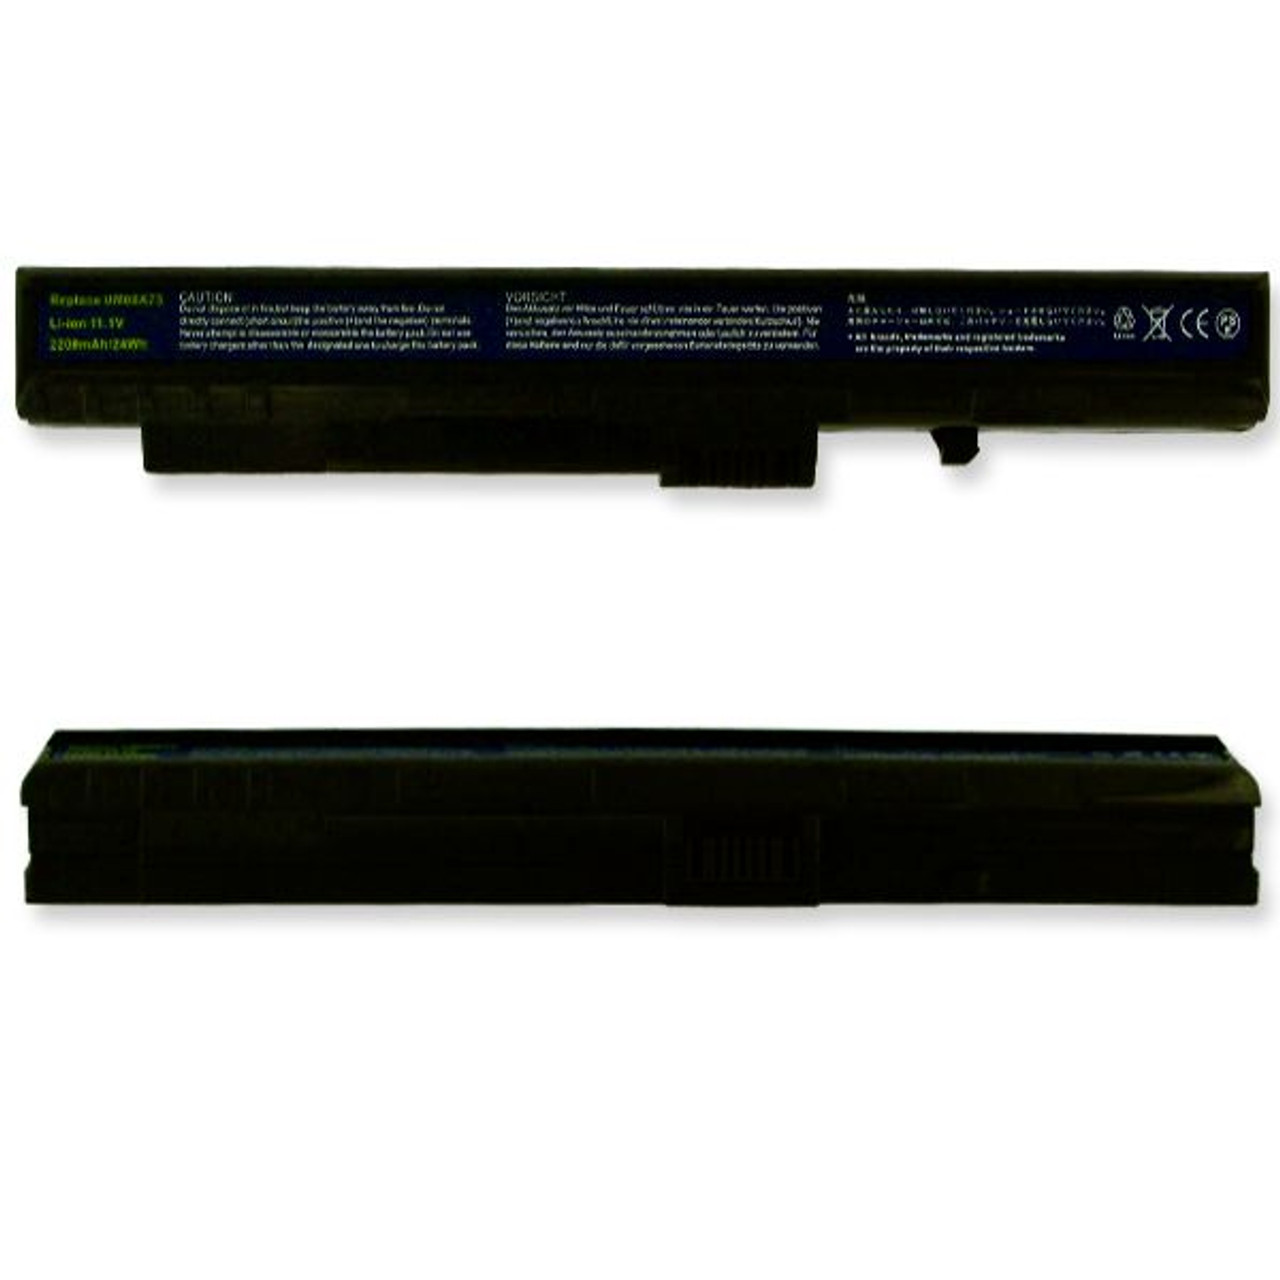 Acer LC.BTP00.043, UM08A31, UM08A51, UM08A52, UM08A72, UM08A73, UM08A31, UM08A73 Laptop Battery - 11.1V 2200mAh 24WH 3 Cell Li-Ion Notebook Replacement